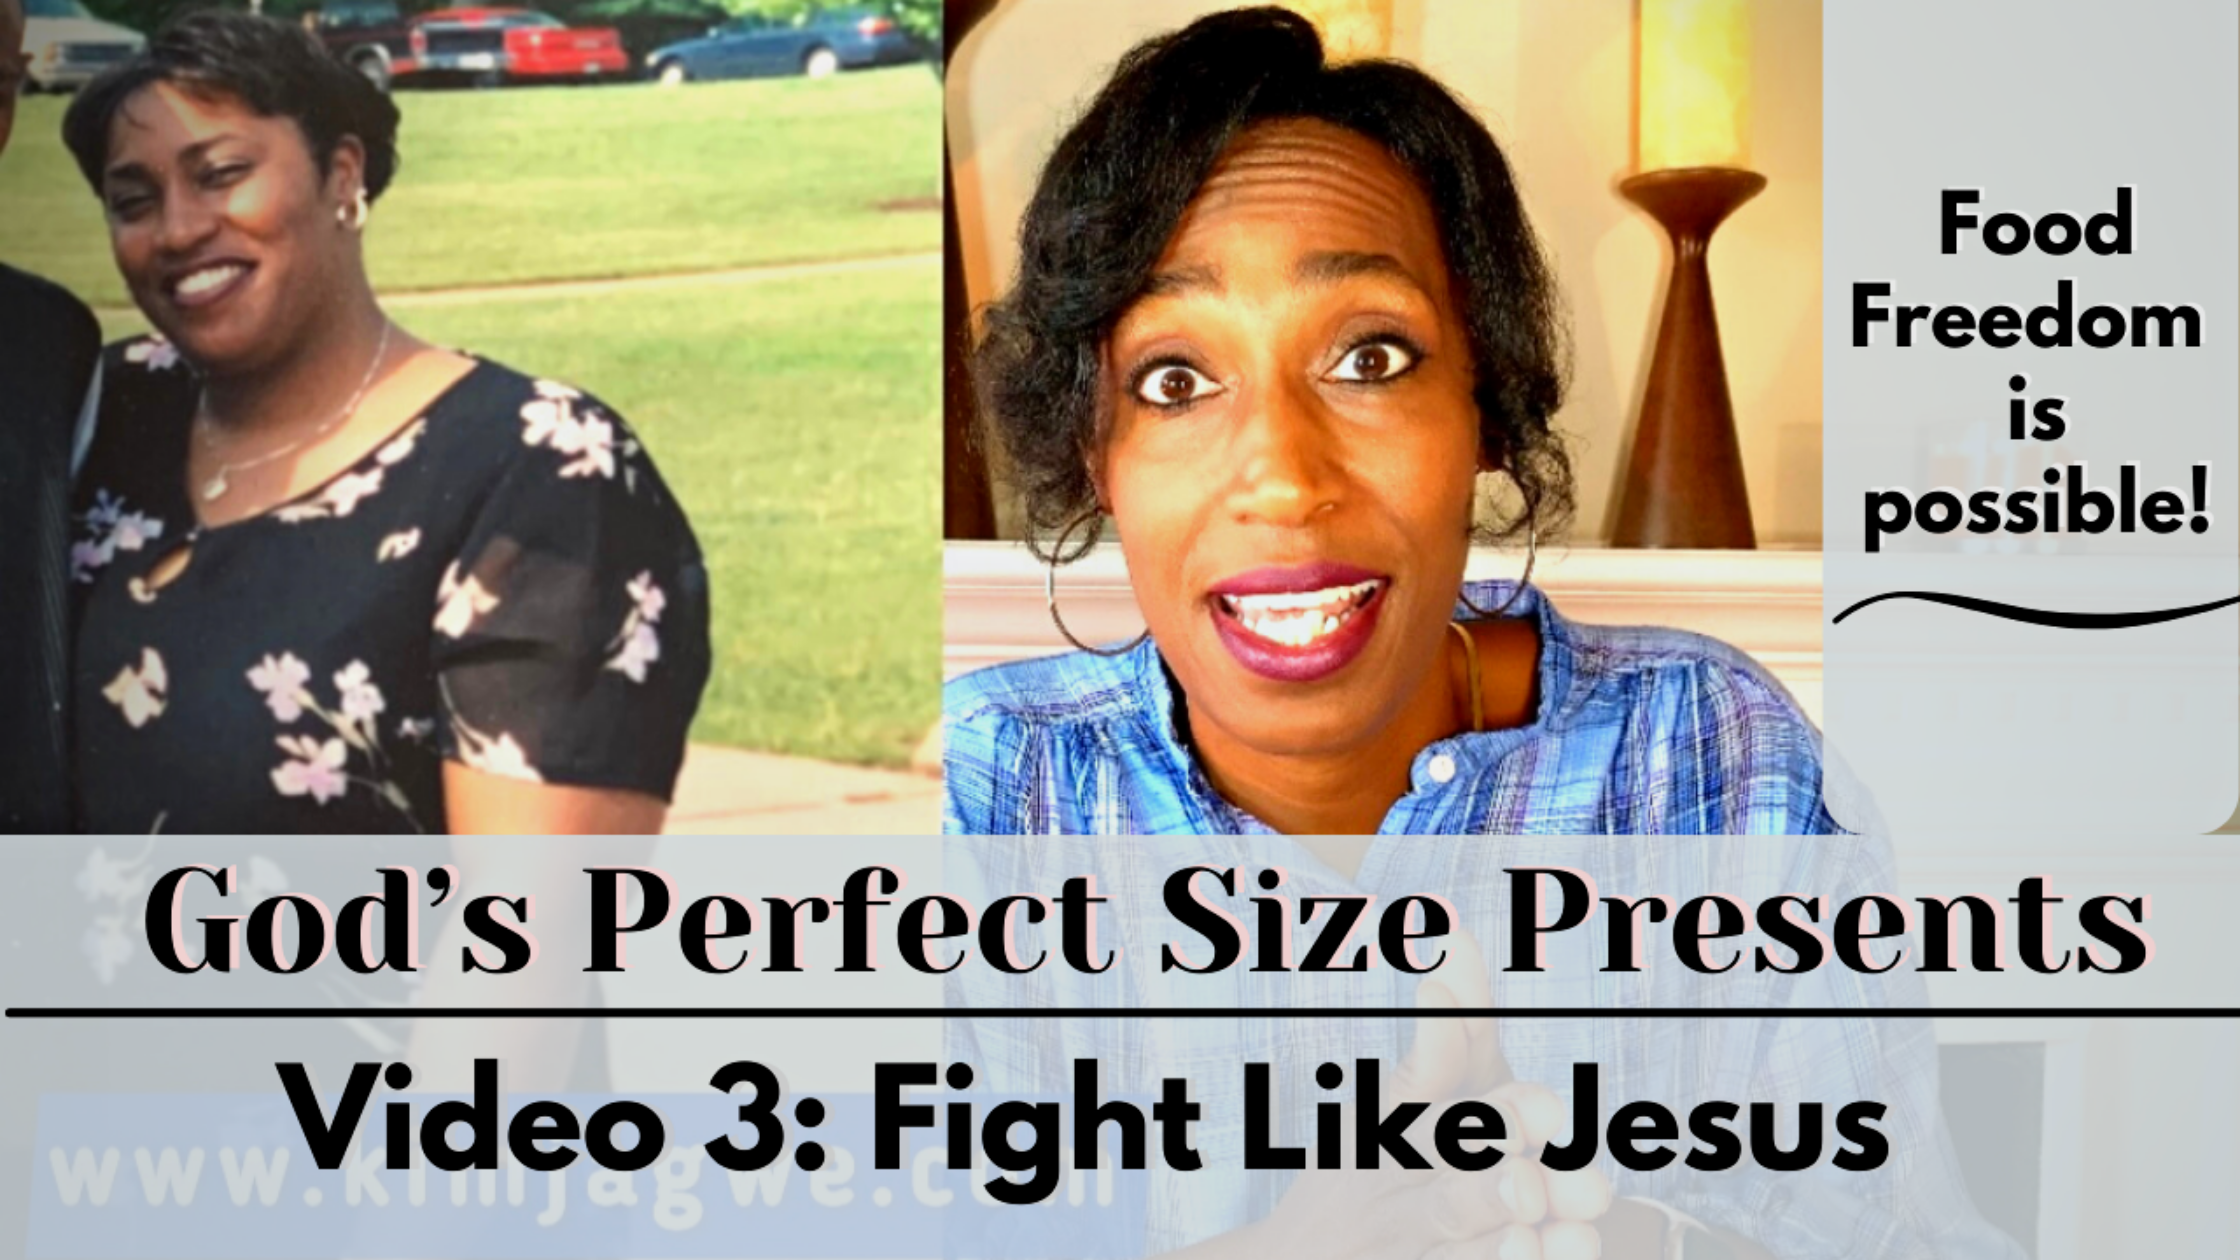 Fight Like Jesus, Video 3 Presented by God’s Perfect Size